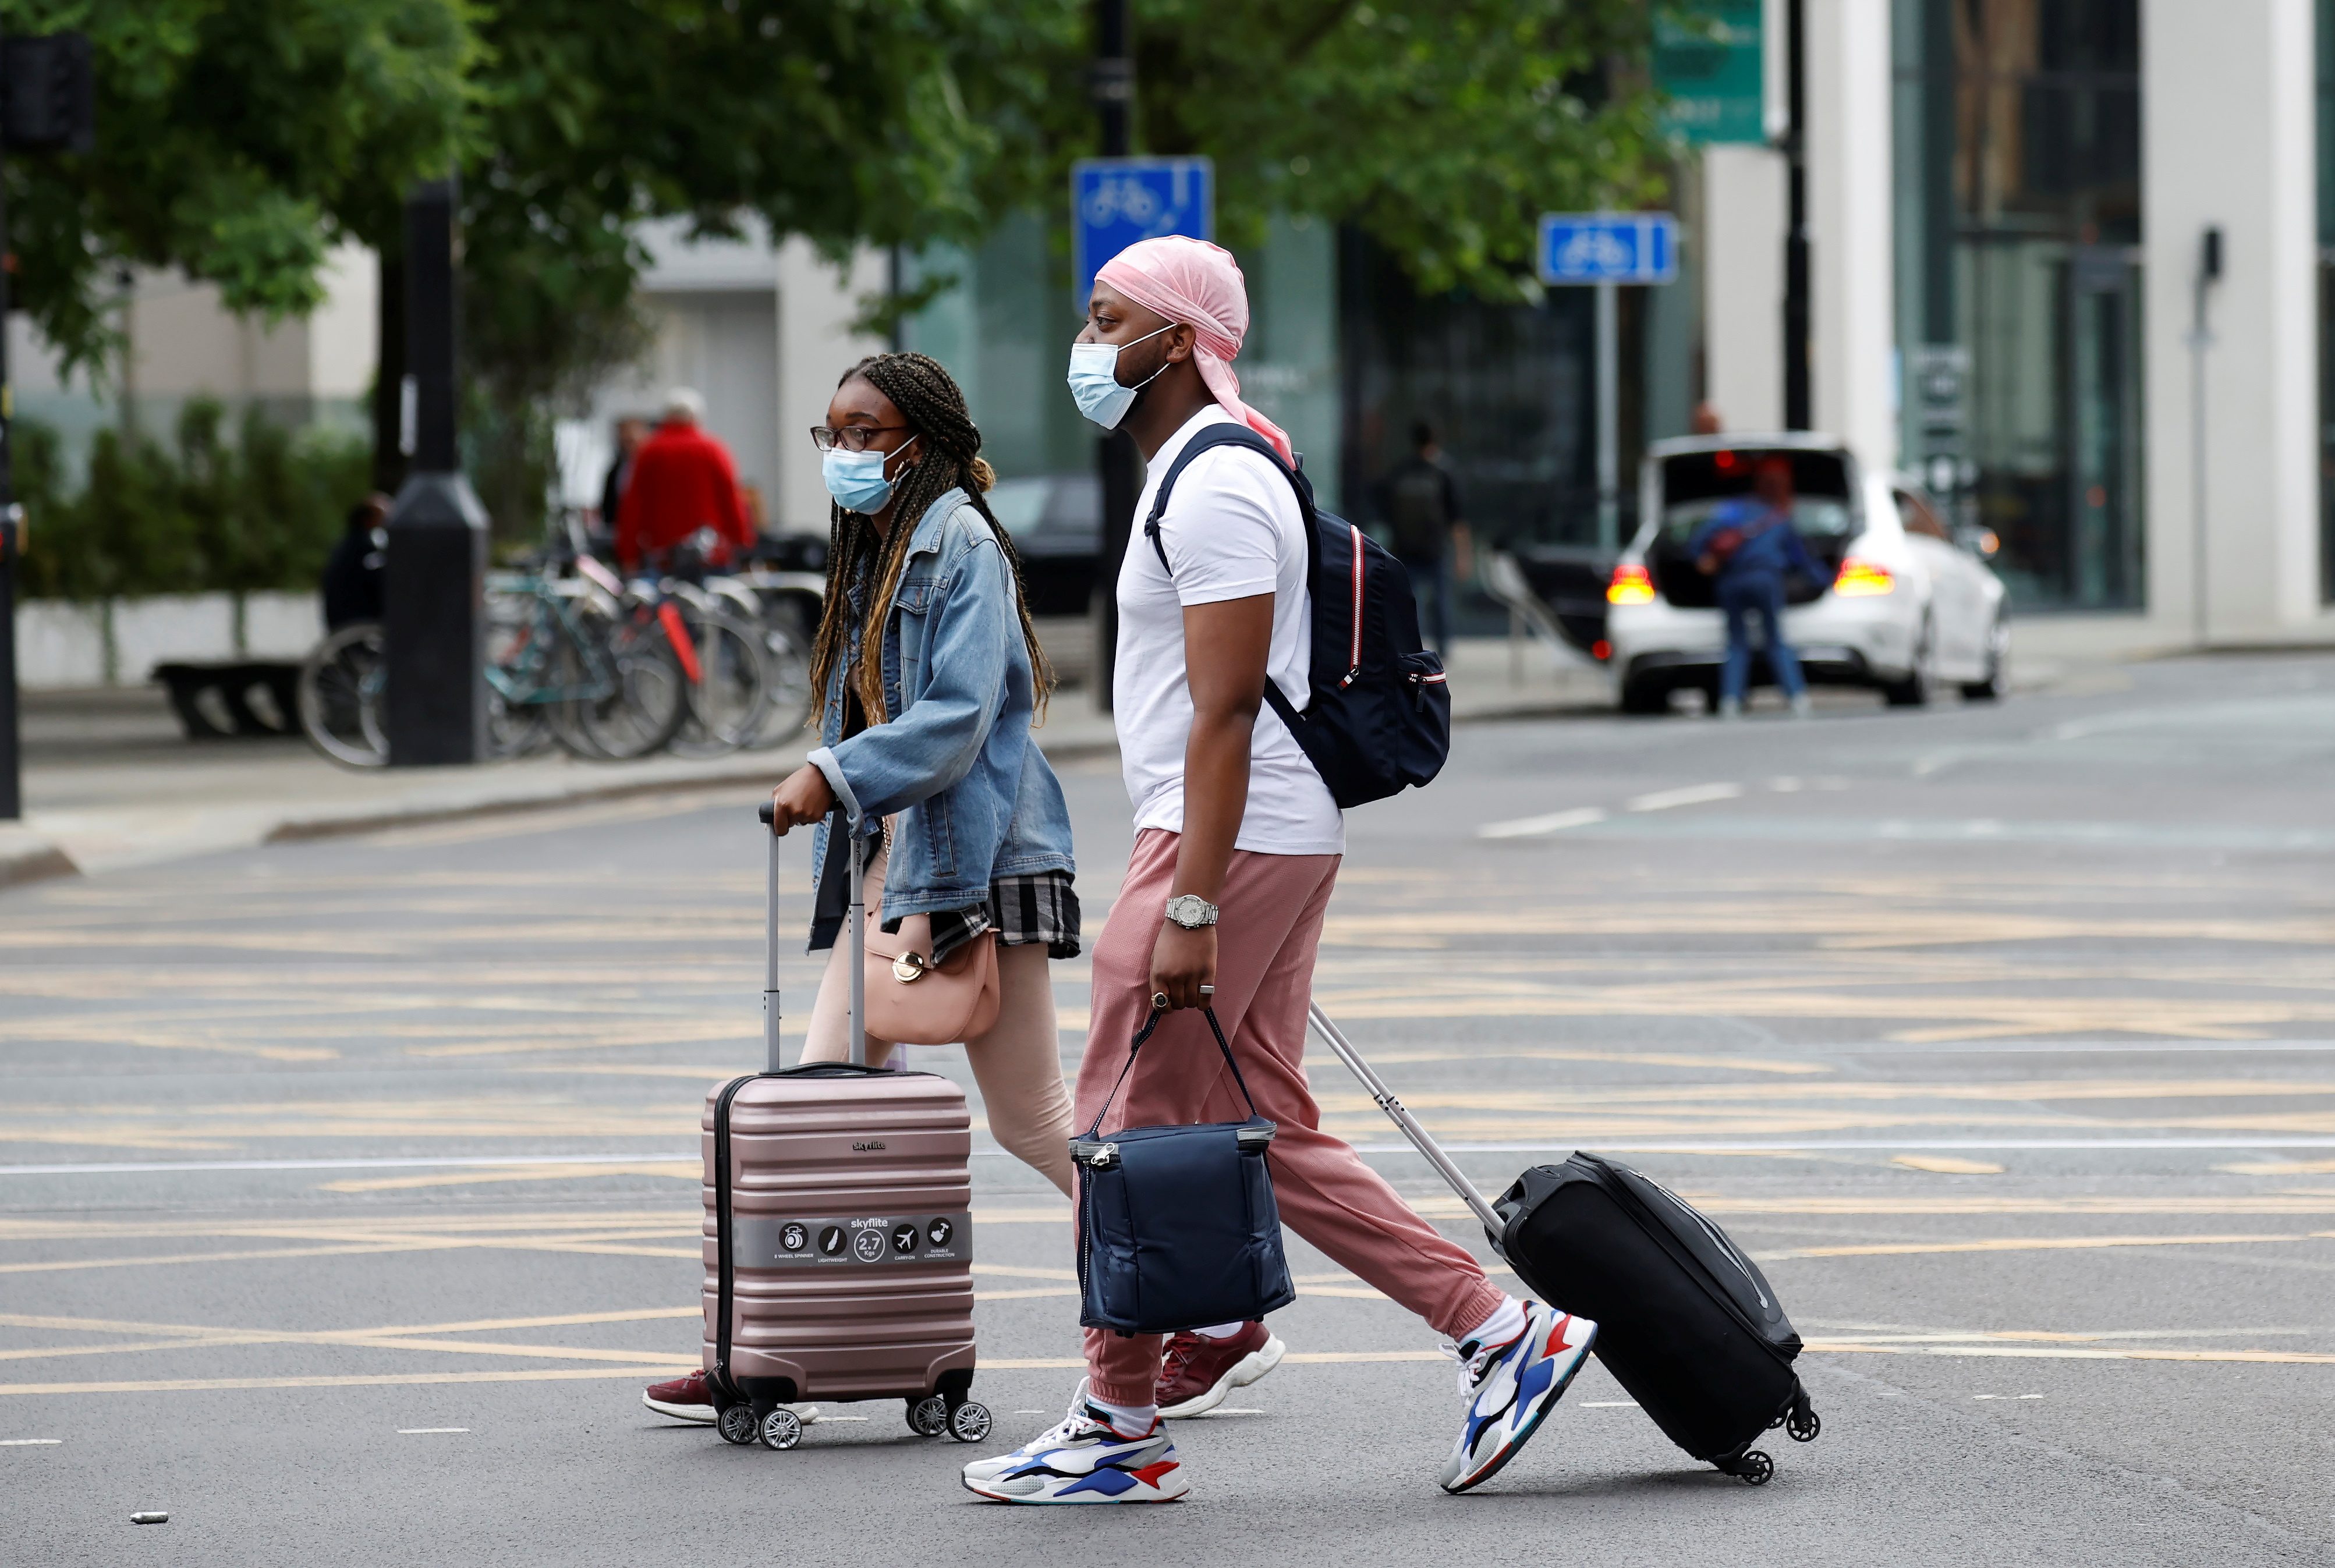 People wear protective masks as they walk with suitcases through the city centre, amid the outbreak of the coronavirus disease (COVID-19) in Manchester